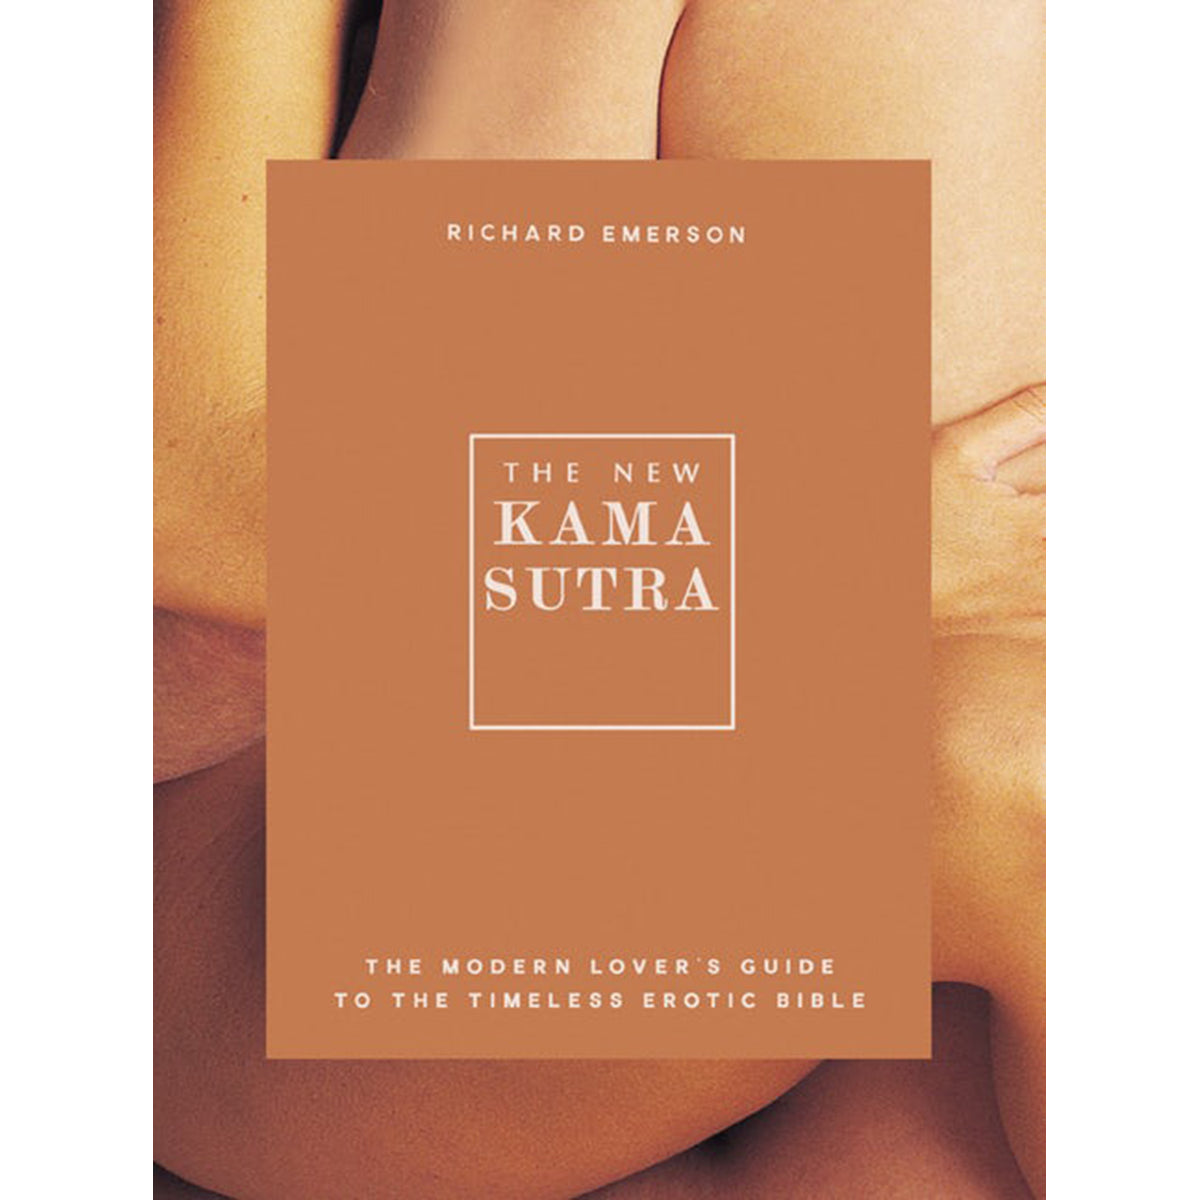 The NEW Kama Sutra